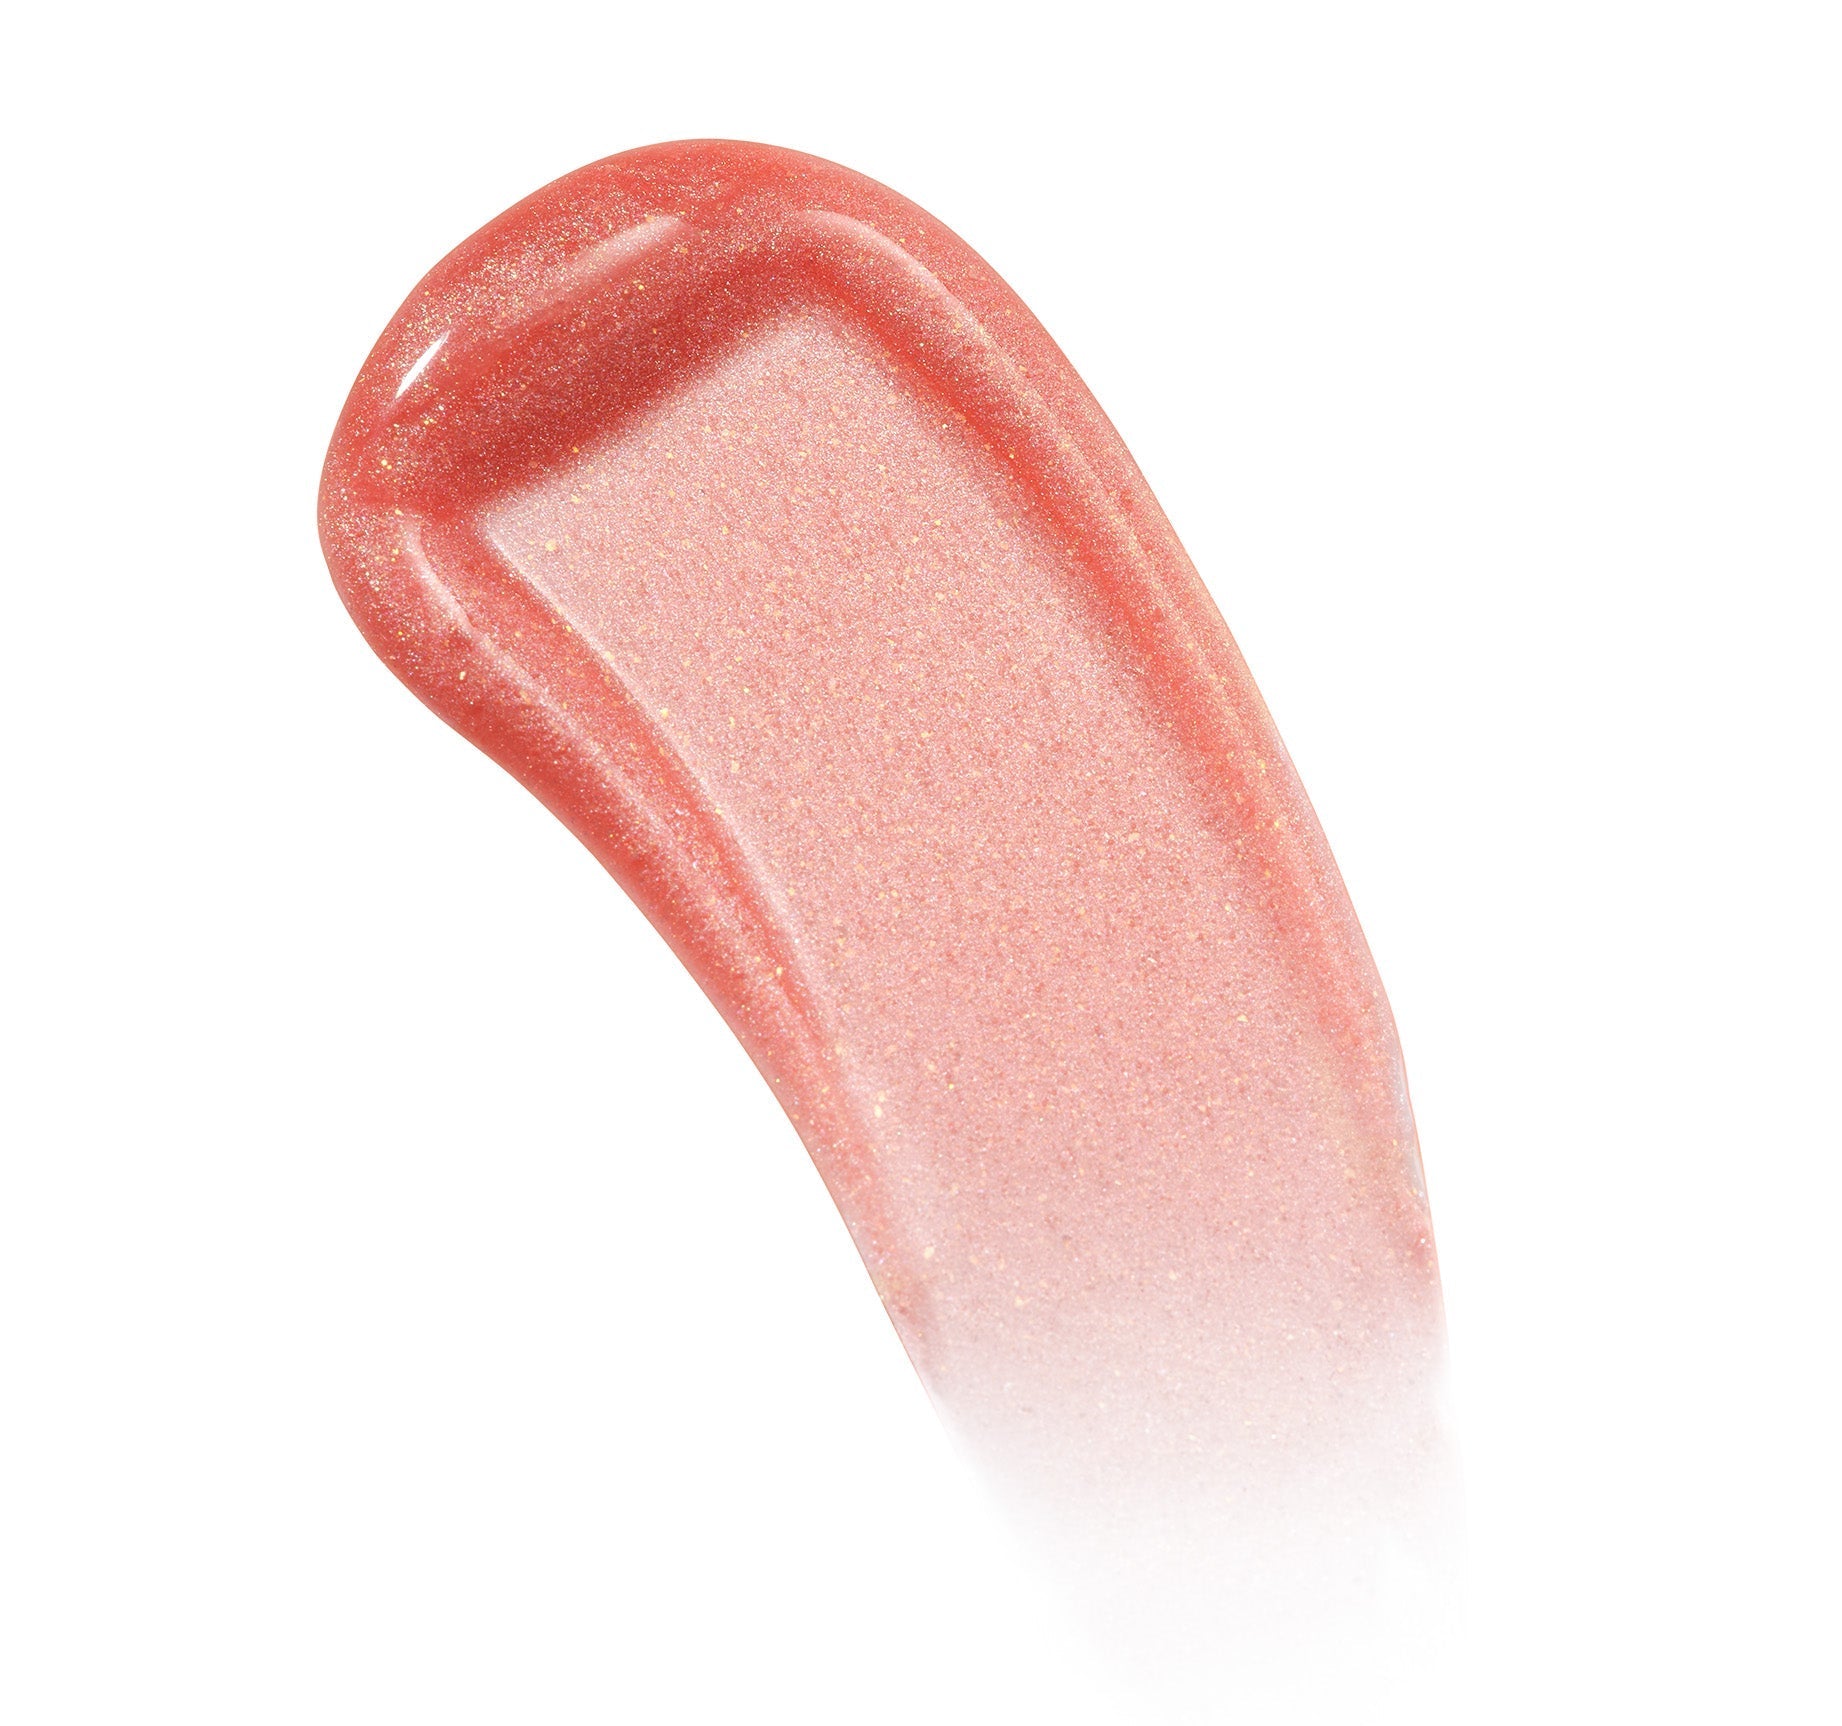 Aurascape Dripglass Glazed Highshine Pearlized Lip Gloss - Cosmic Coral - Image 2